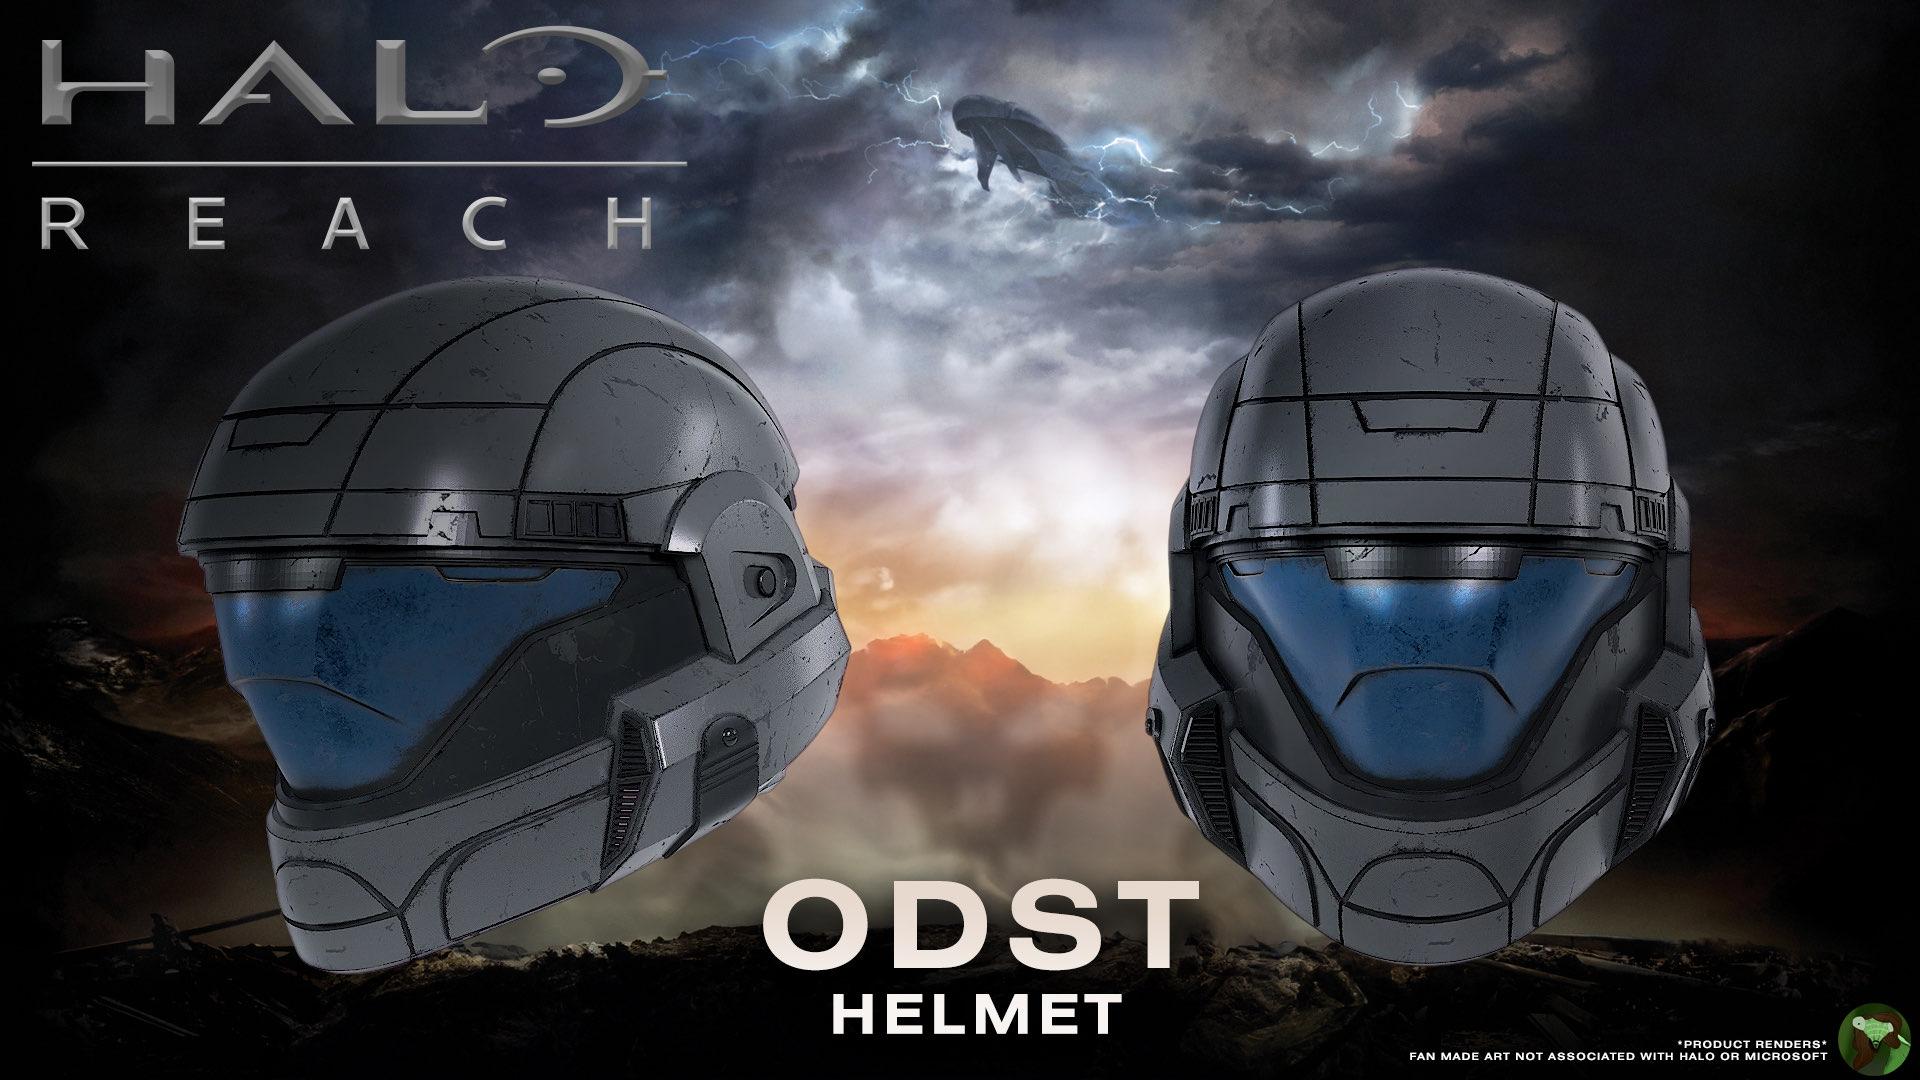 Featuring the Halo: Reach ODST Helmet!